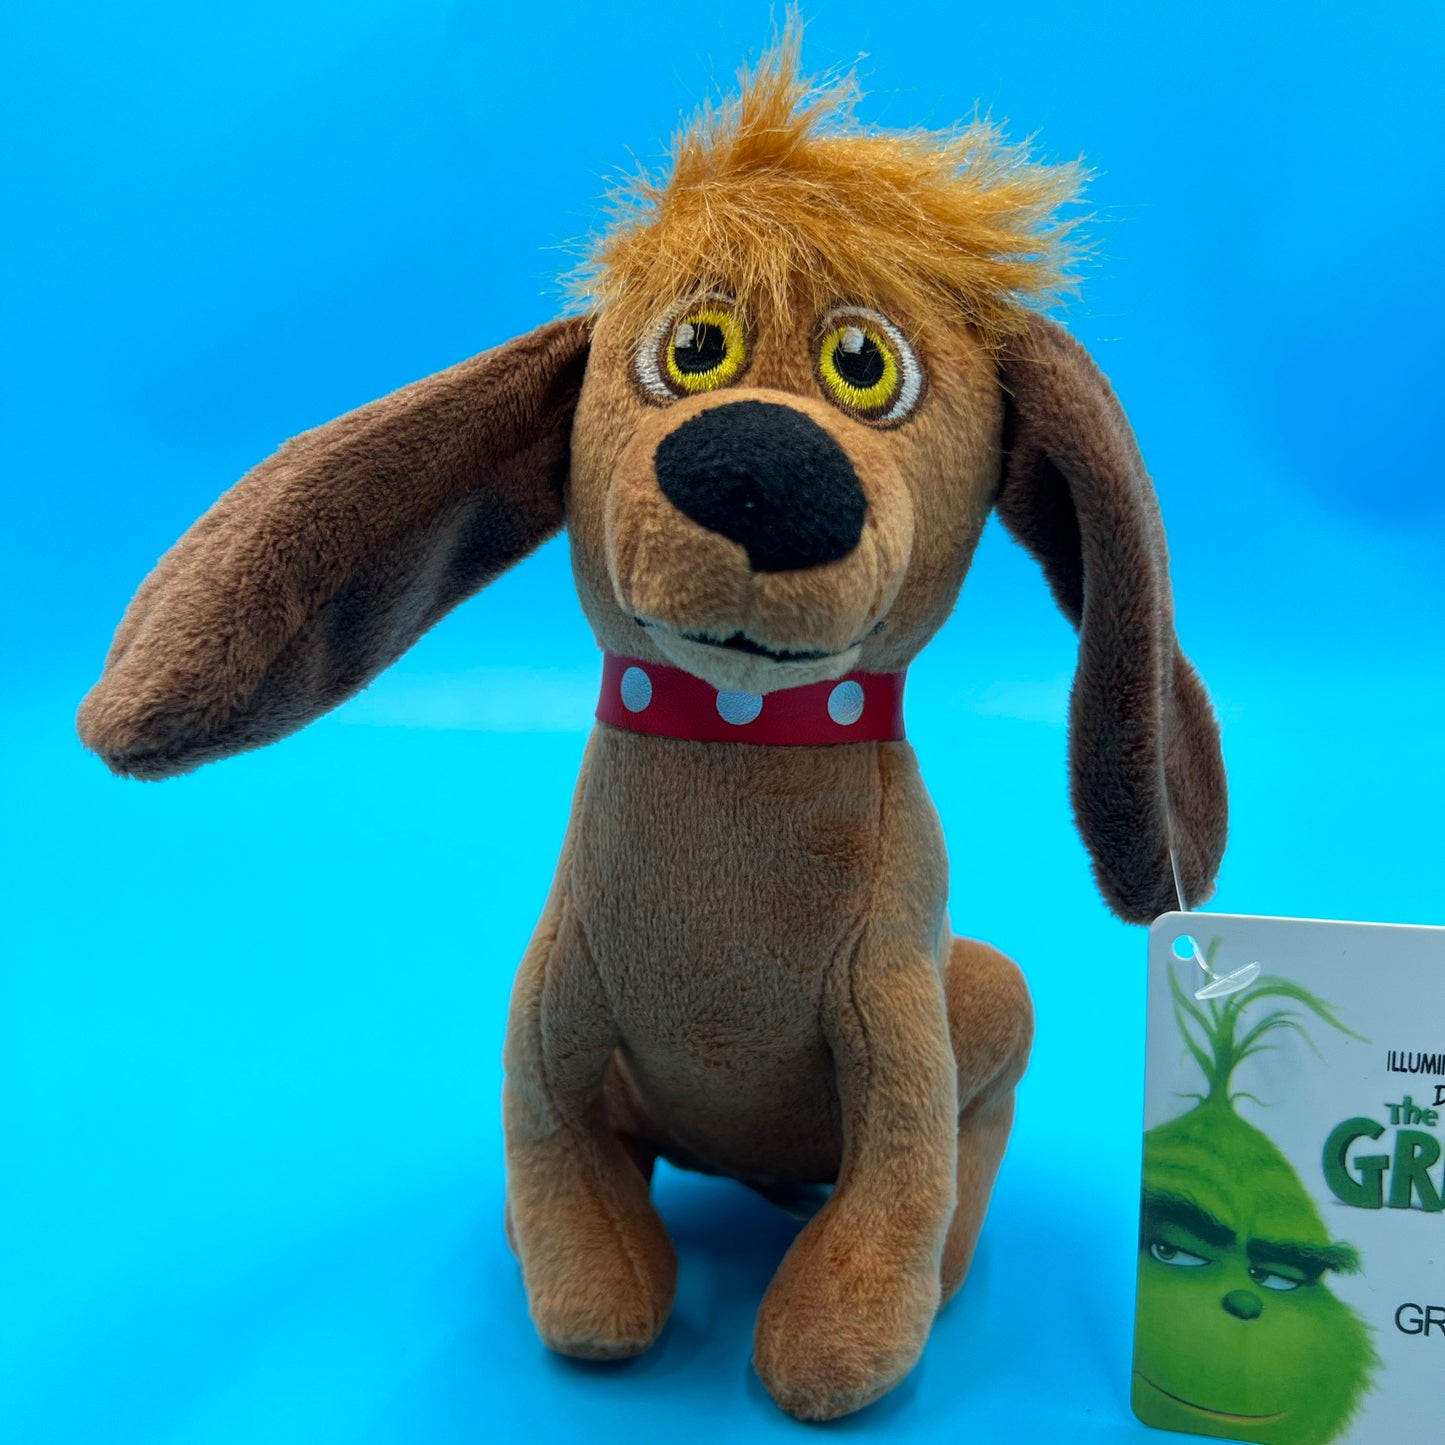 Max the Grinch Toy bearsupreme